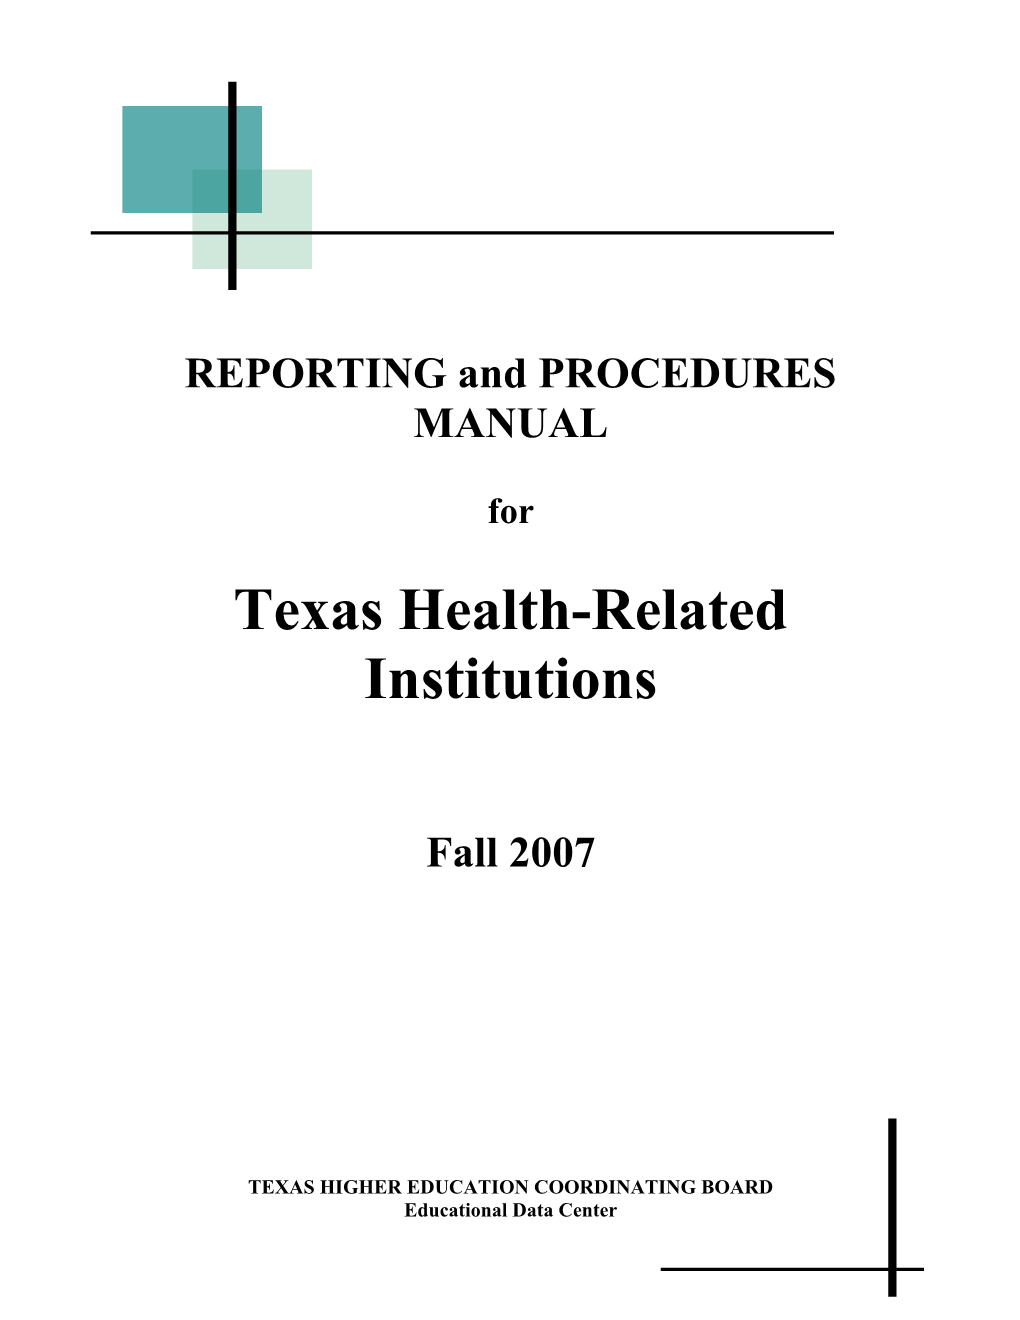 Reporting and Procedures Manual for Texas Health-Related Institutions, Fall 2007